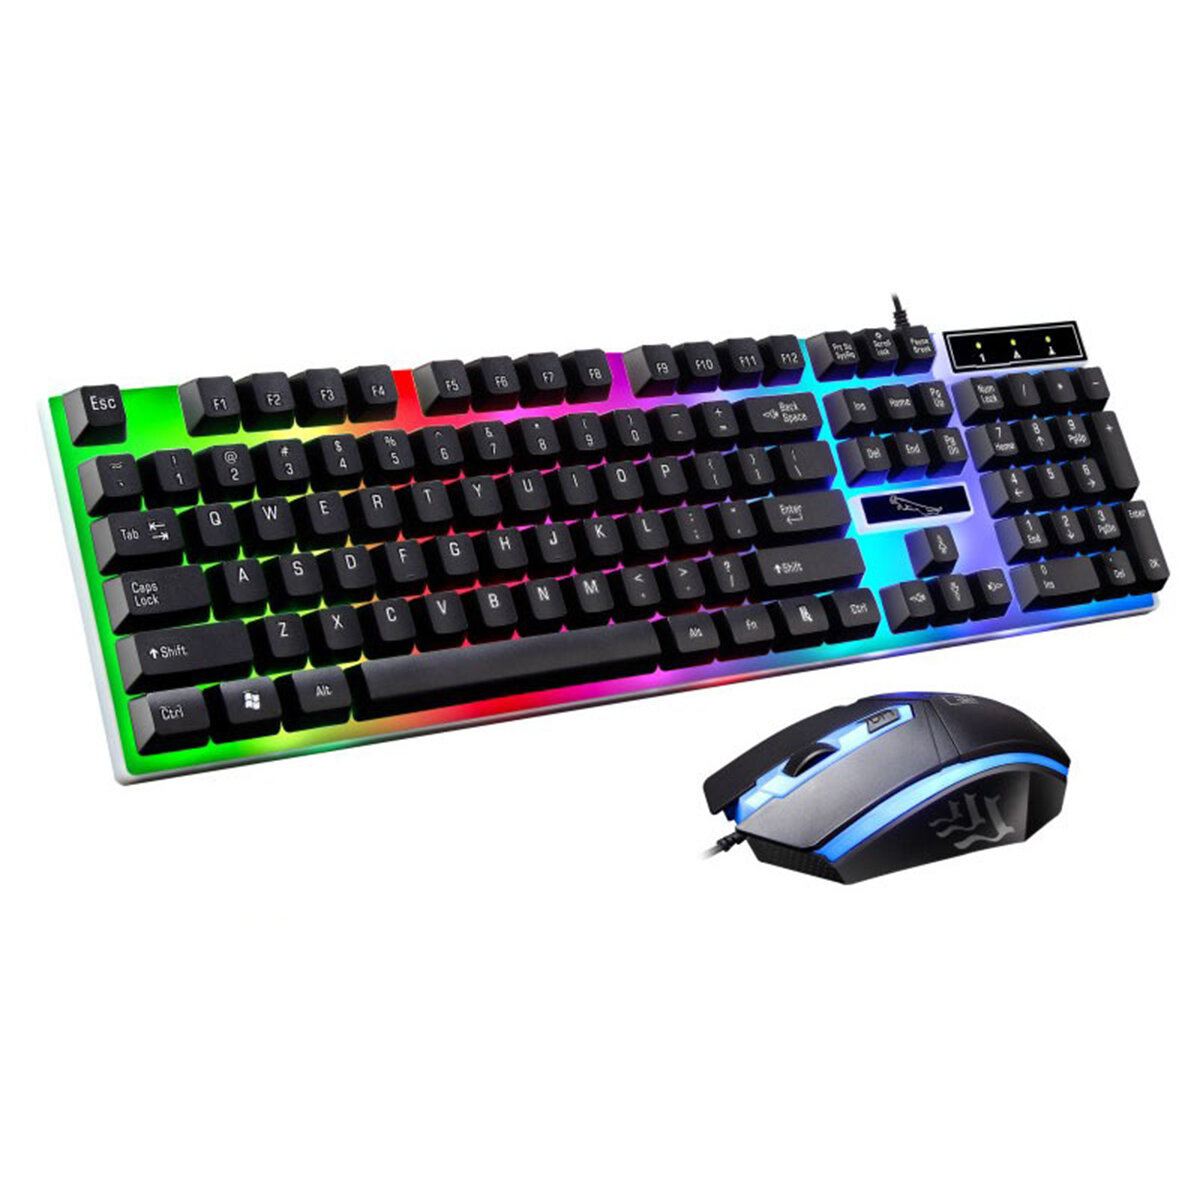 

G21 104 Keys Wired Keyboard & Mouse Set LED Colorful Backlight Mechanical Feel Gaming Keyboard for Home Office Computer